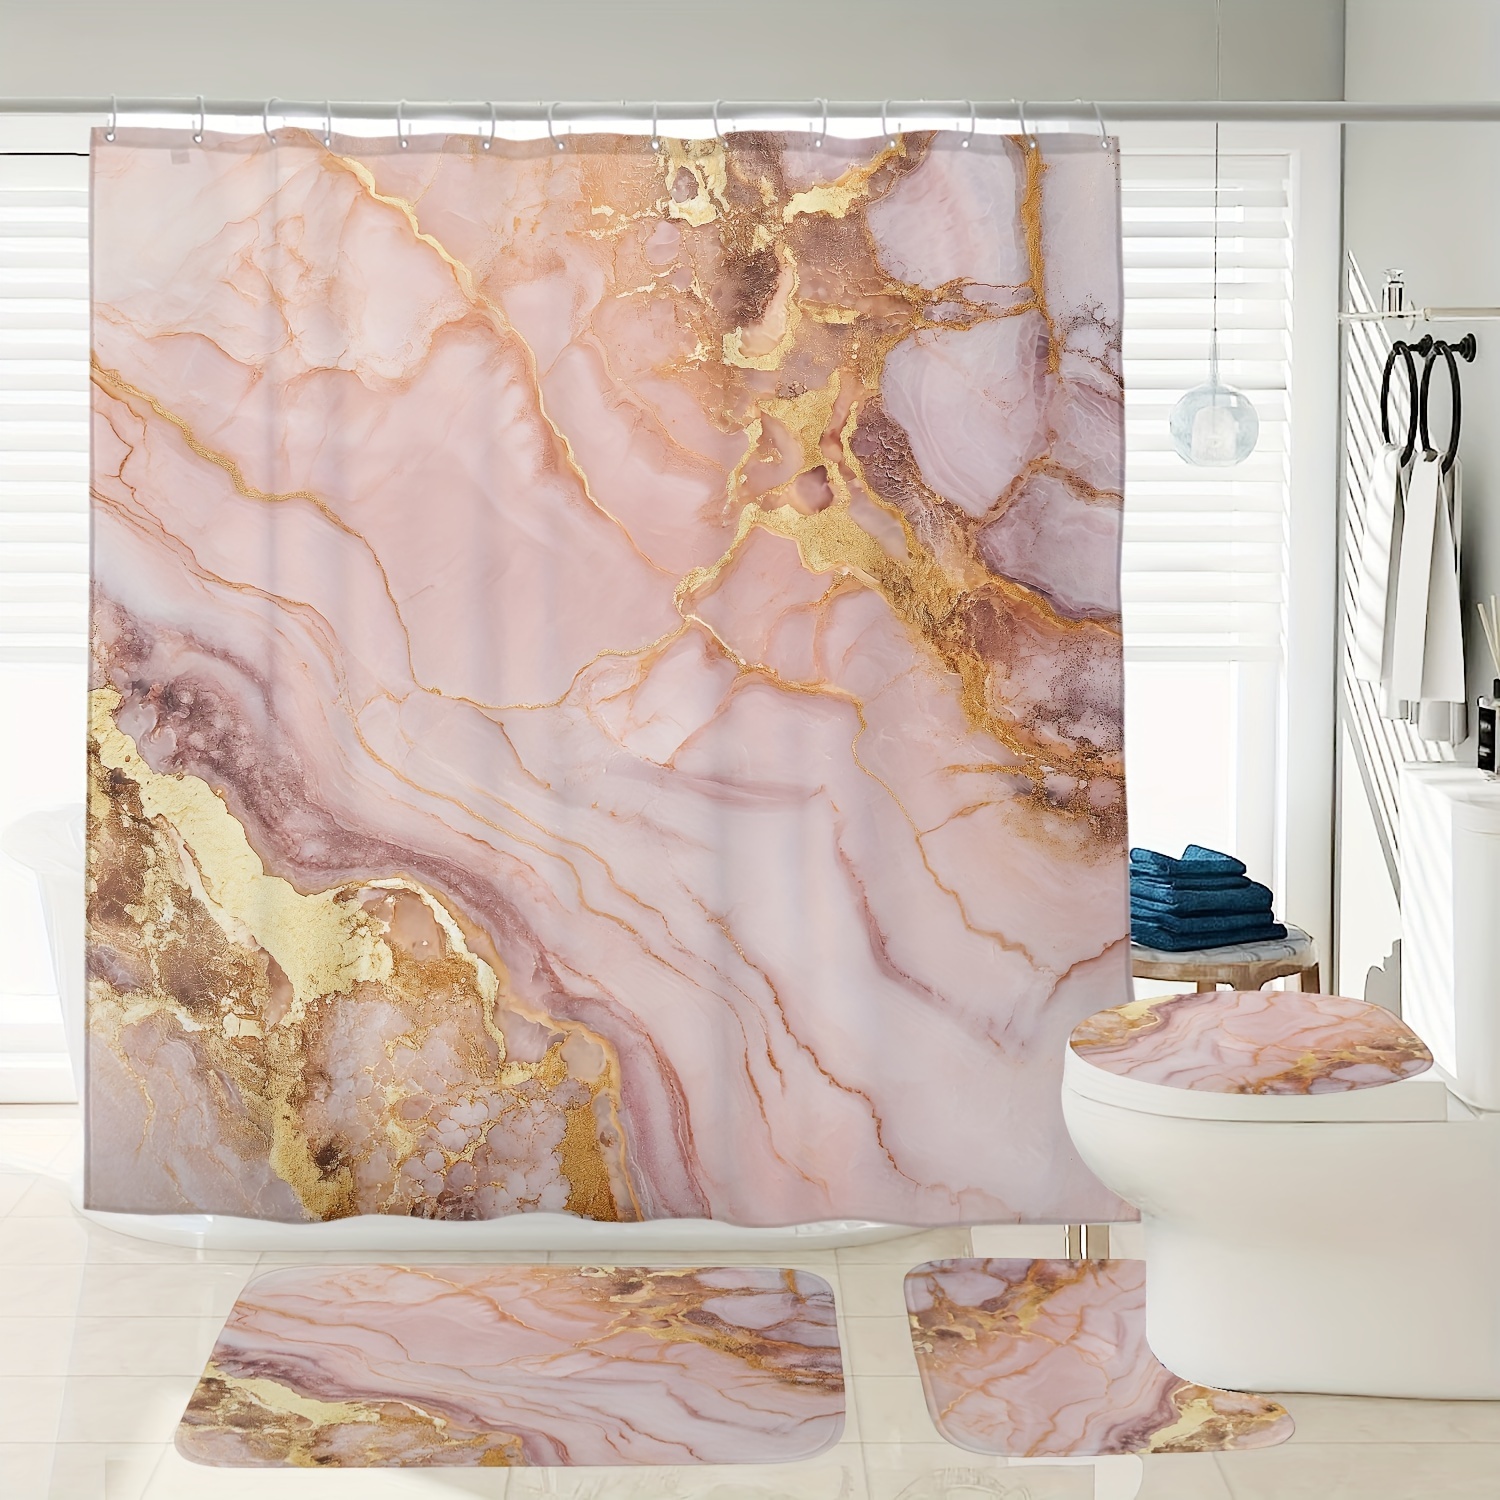 

Marble Pattern Shower Curtain Set With Non-slip Bath Mat, Toilet Lid Cover, And Polyester Lining - Cordless, Woven, Waterproof, Digital Print Bathroom Decor With 12 Hooks - Forest Themed, 72x72 Inches